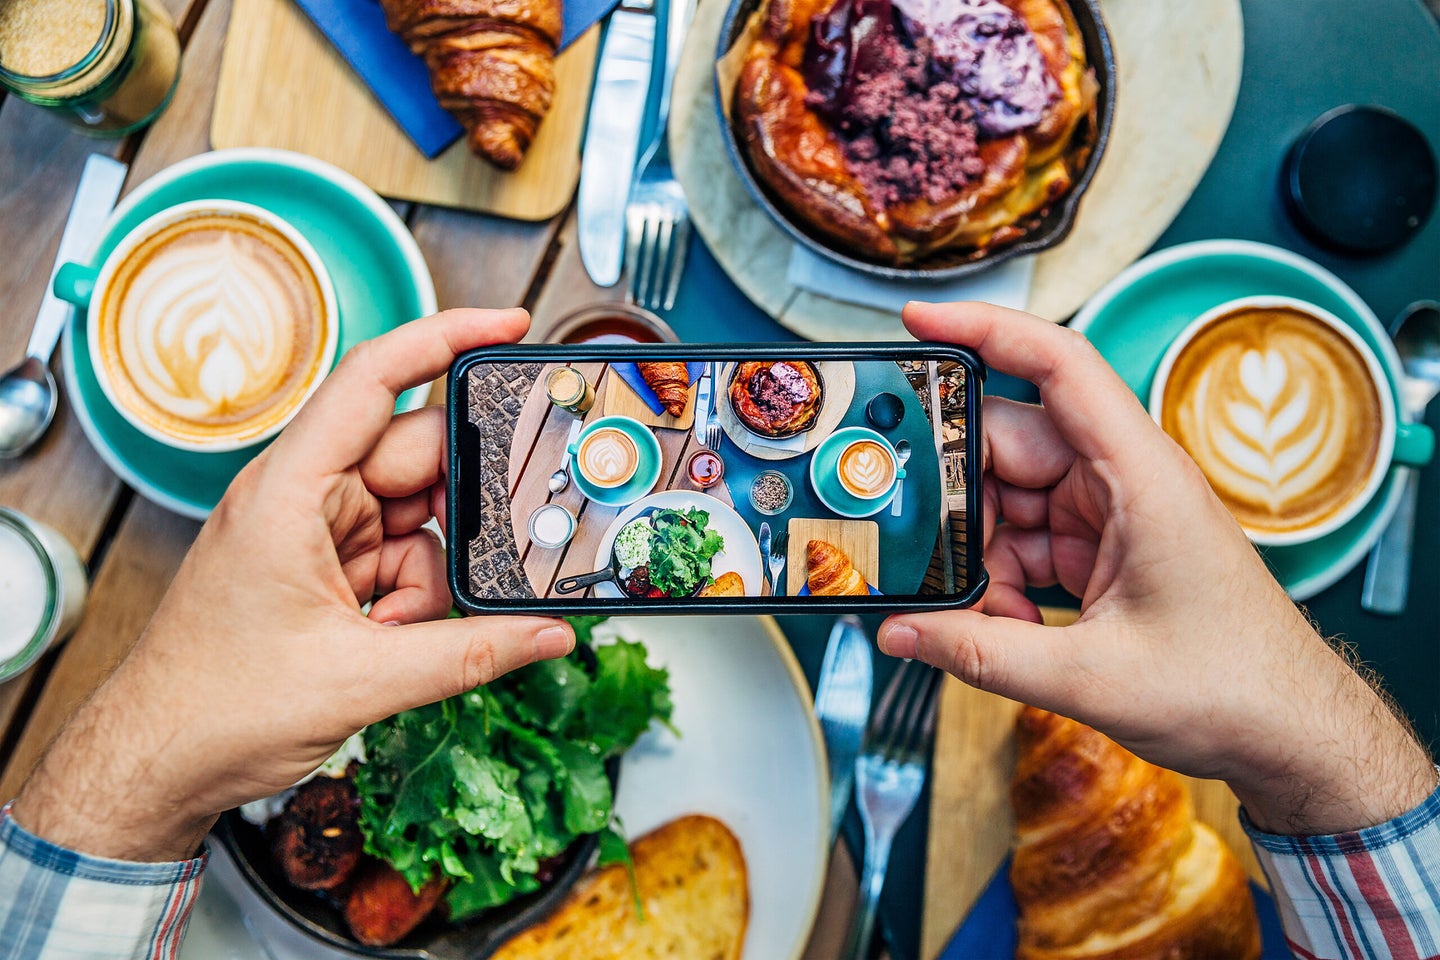 Man photographing breakfast in a cafe with smartphone